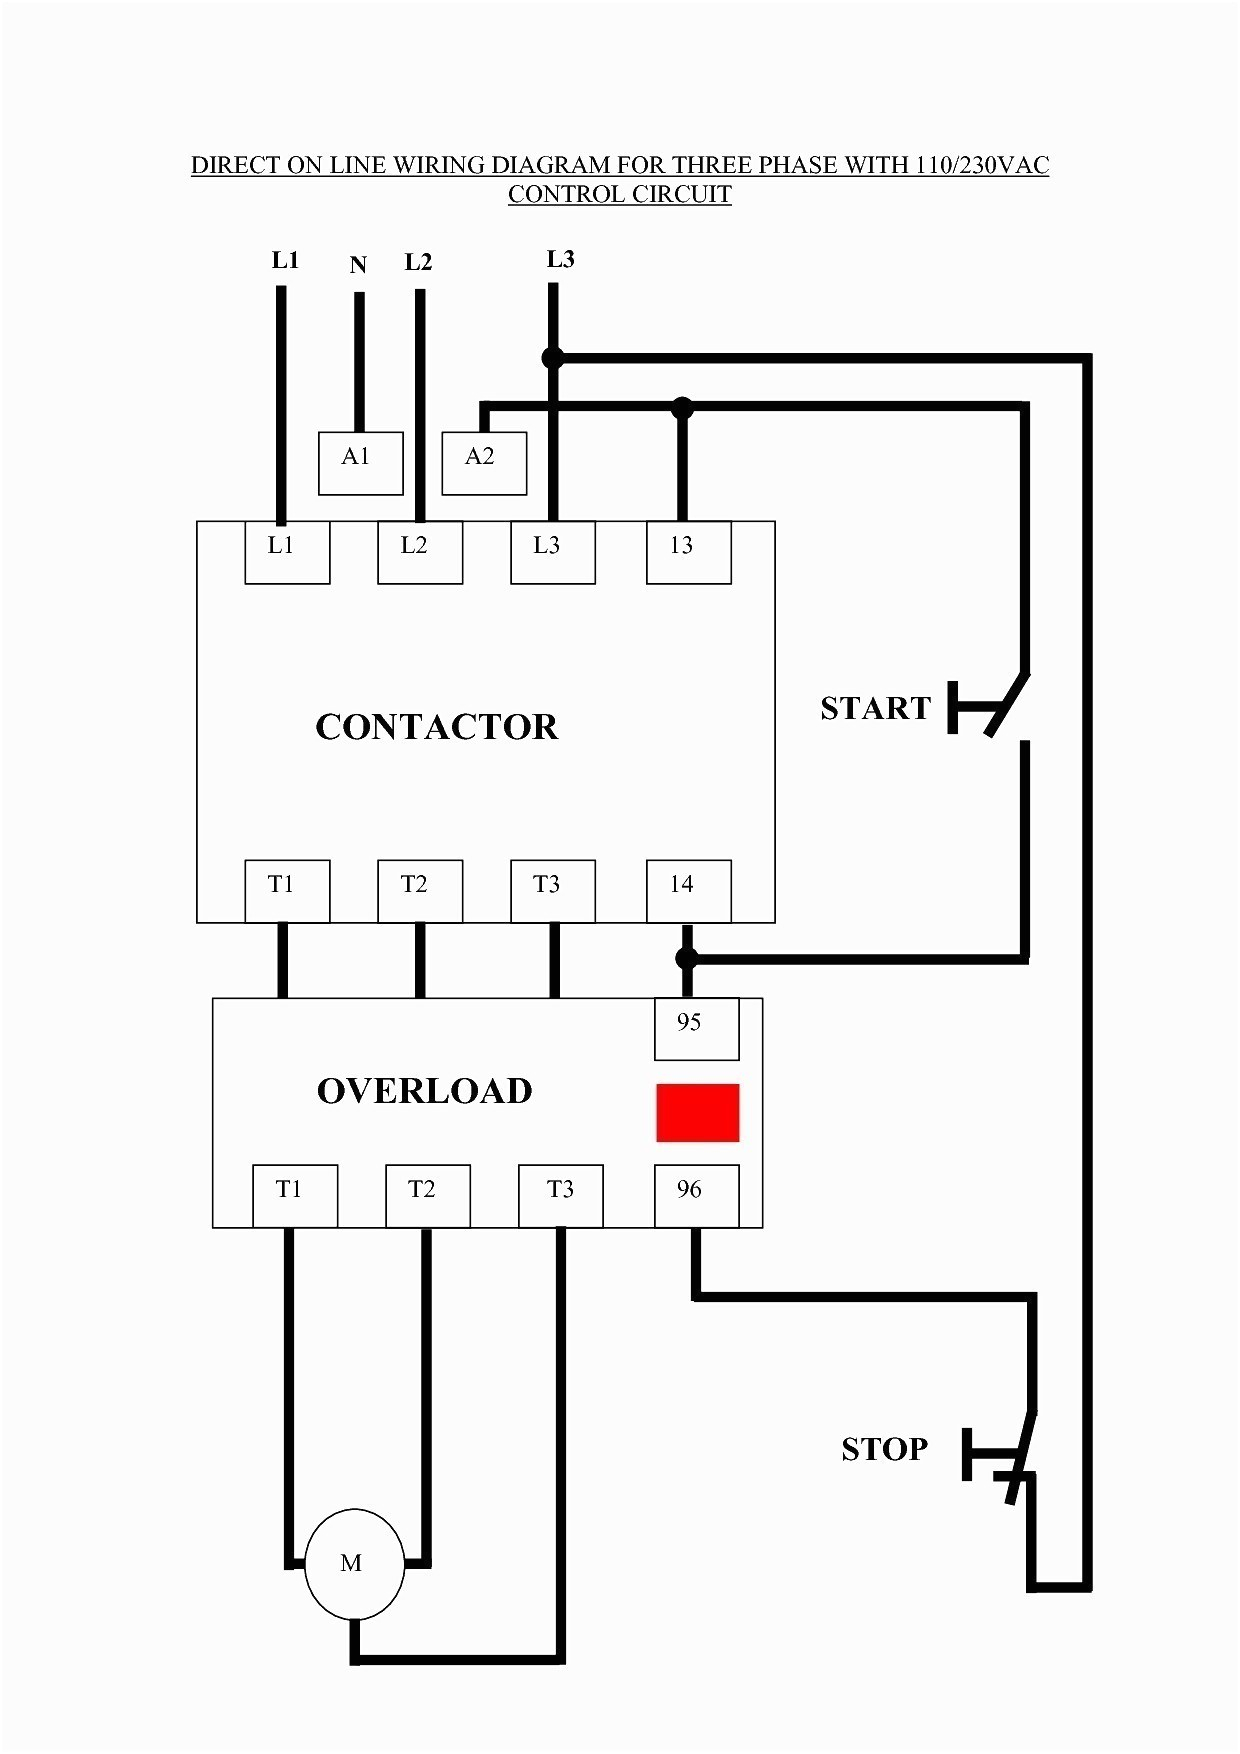 relay coil suppression circuit diagram on 3 phase switch wiring contactor relay coil wiring diagram